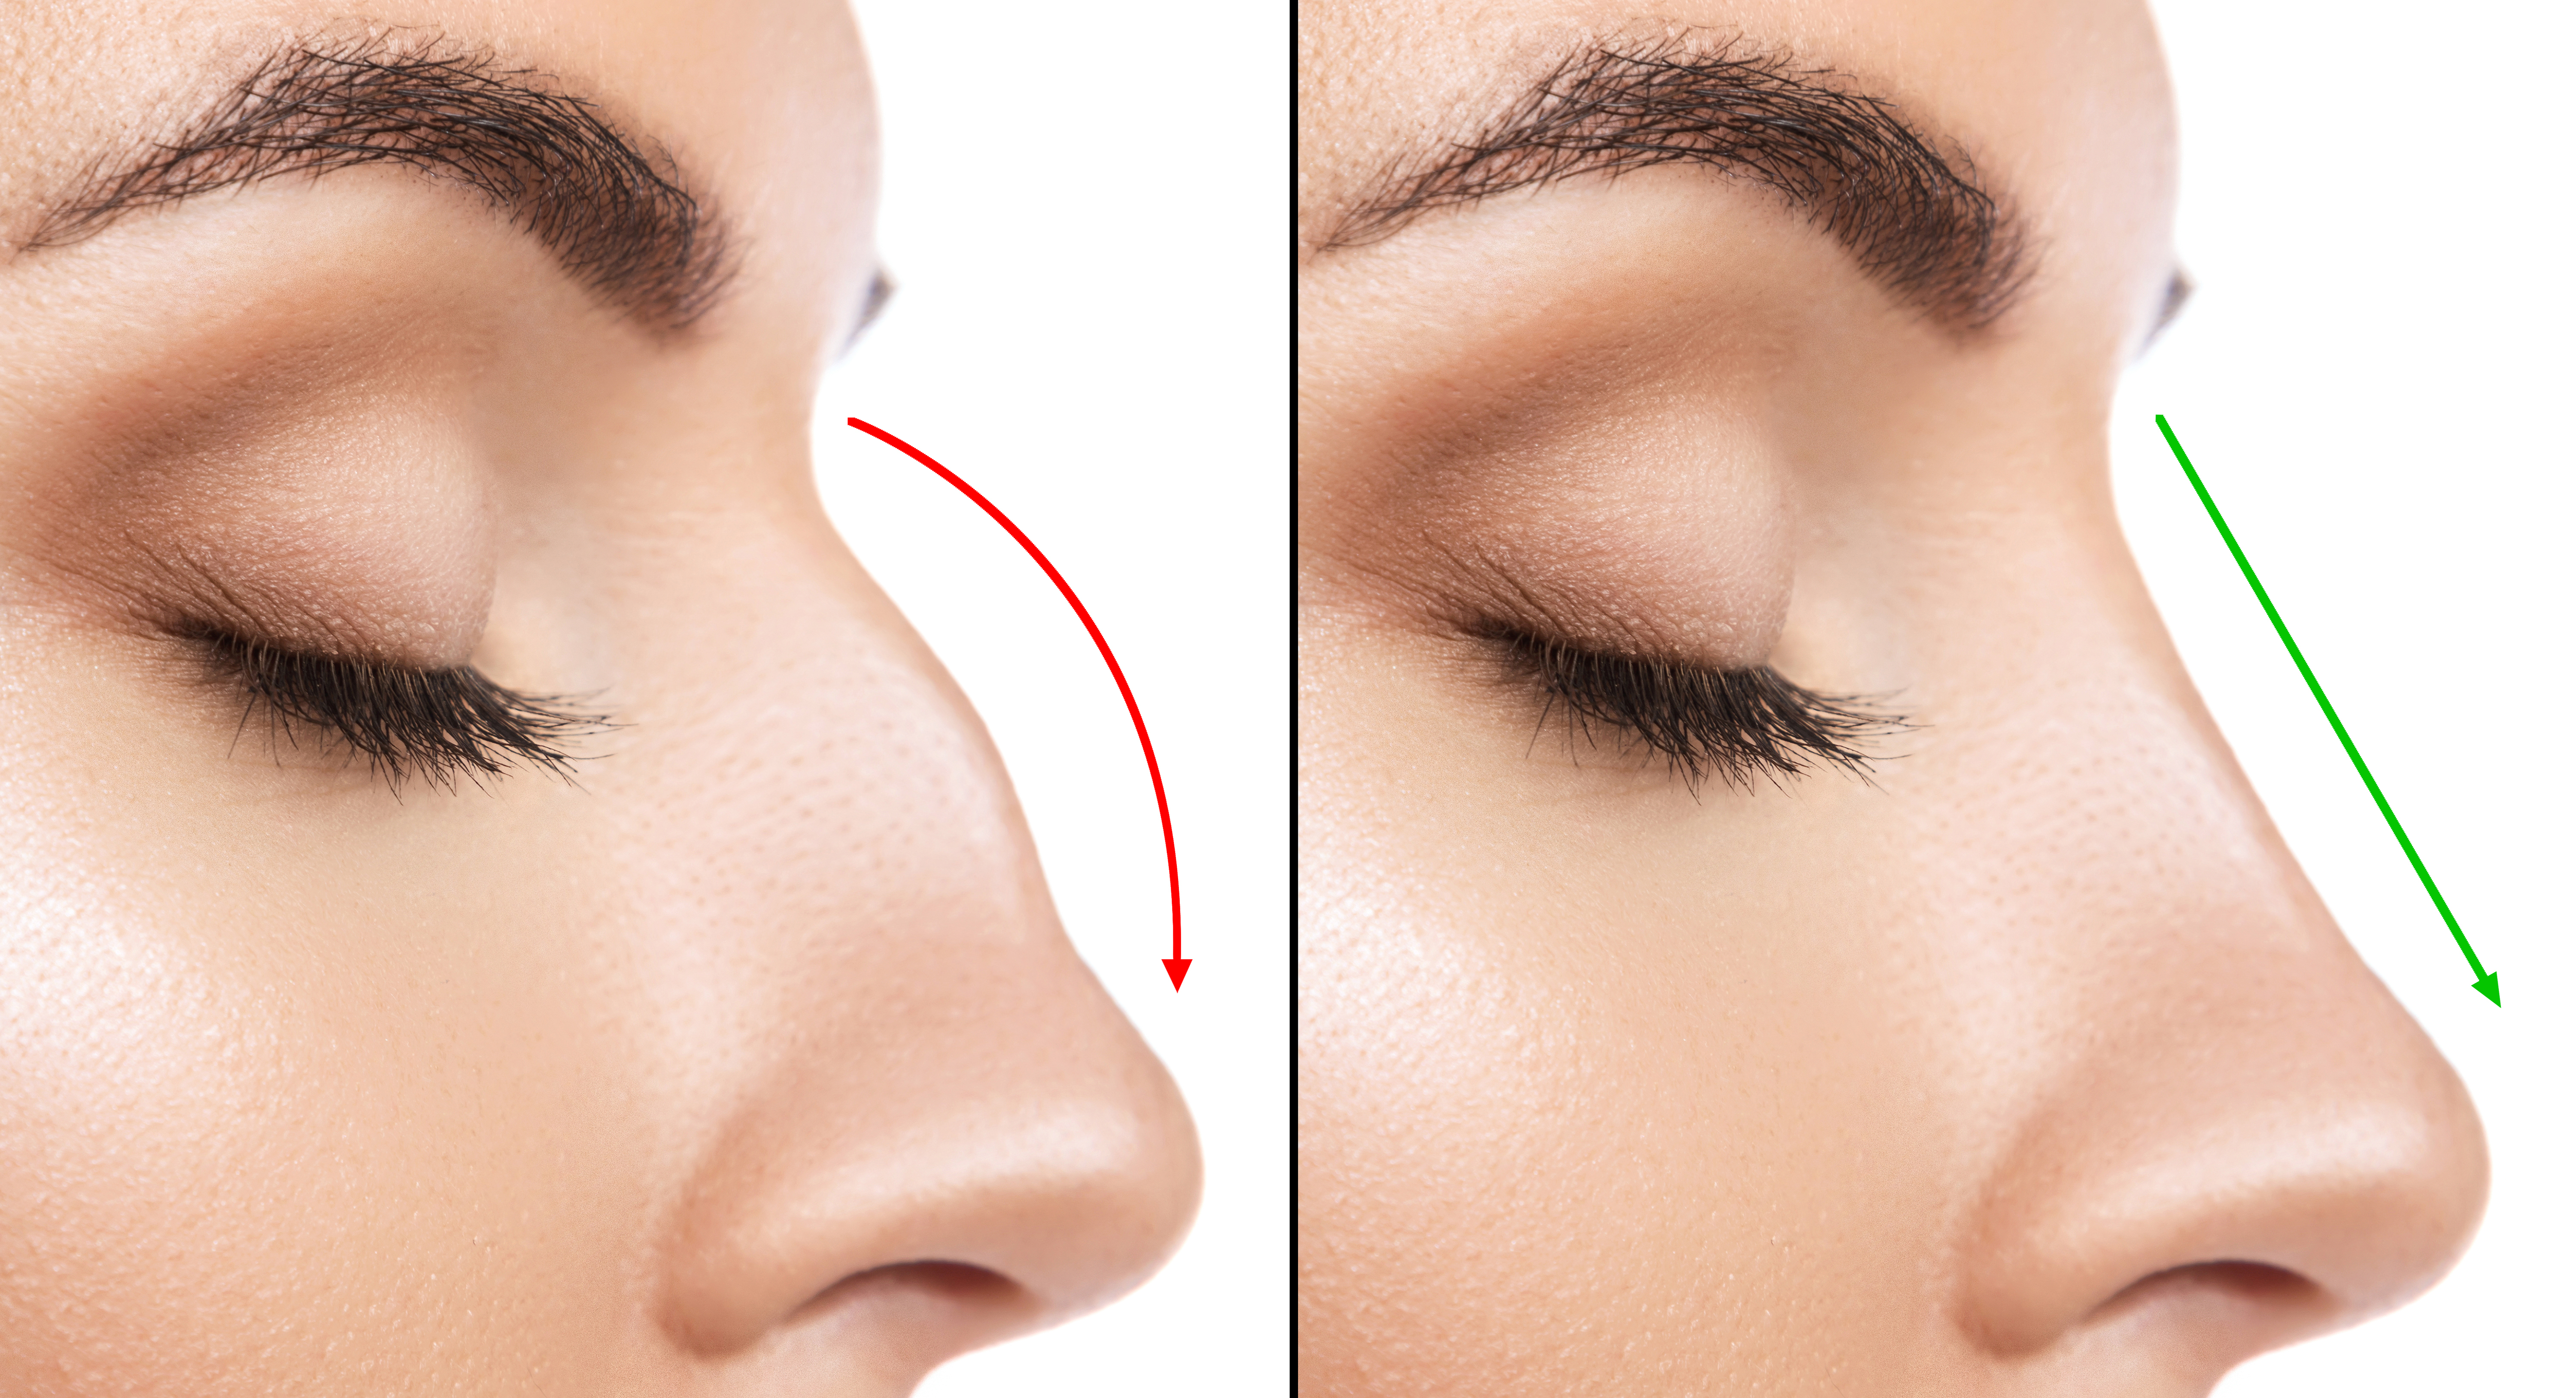 The Advances of Nasal Reconstruction Surgery